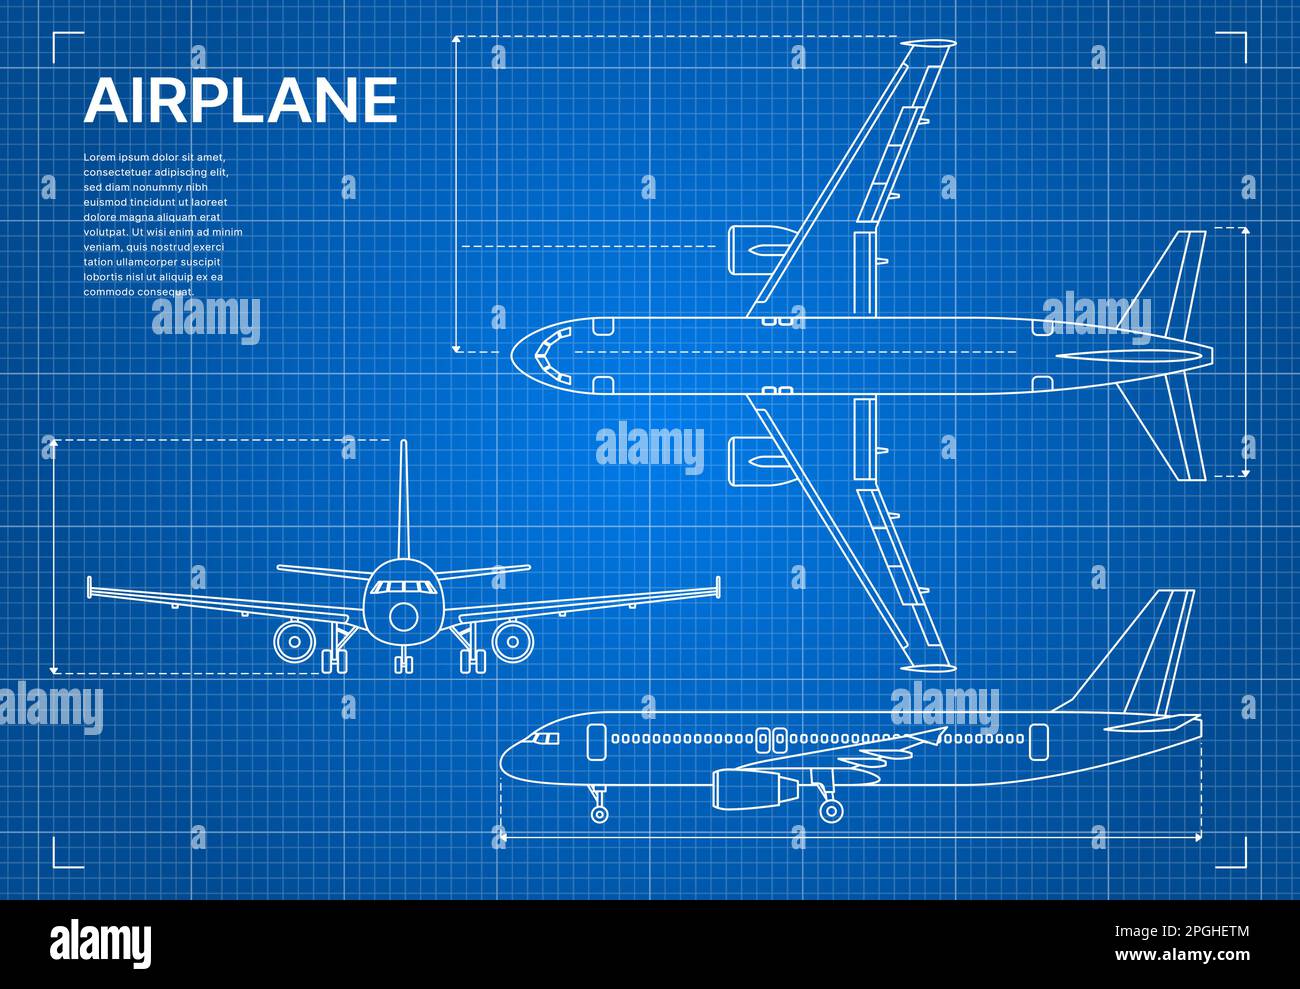 Outline plane aircraft blueprint or airplane design drawing, vector aviation industry. Plane jet blueprint plan with side and top view, aeroplane tech Stock Vector